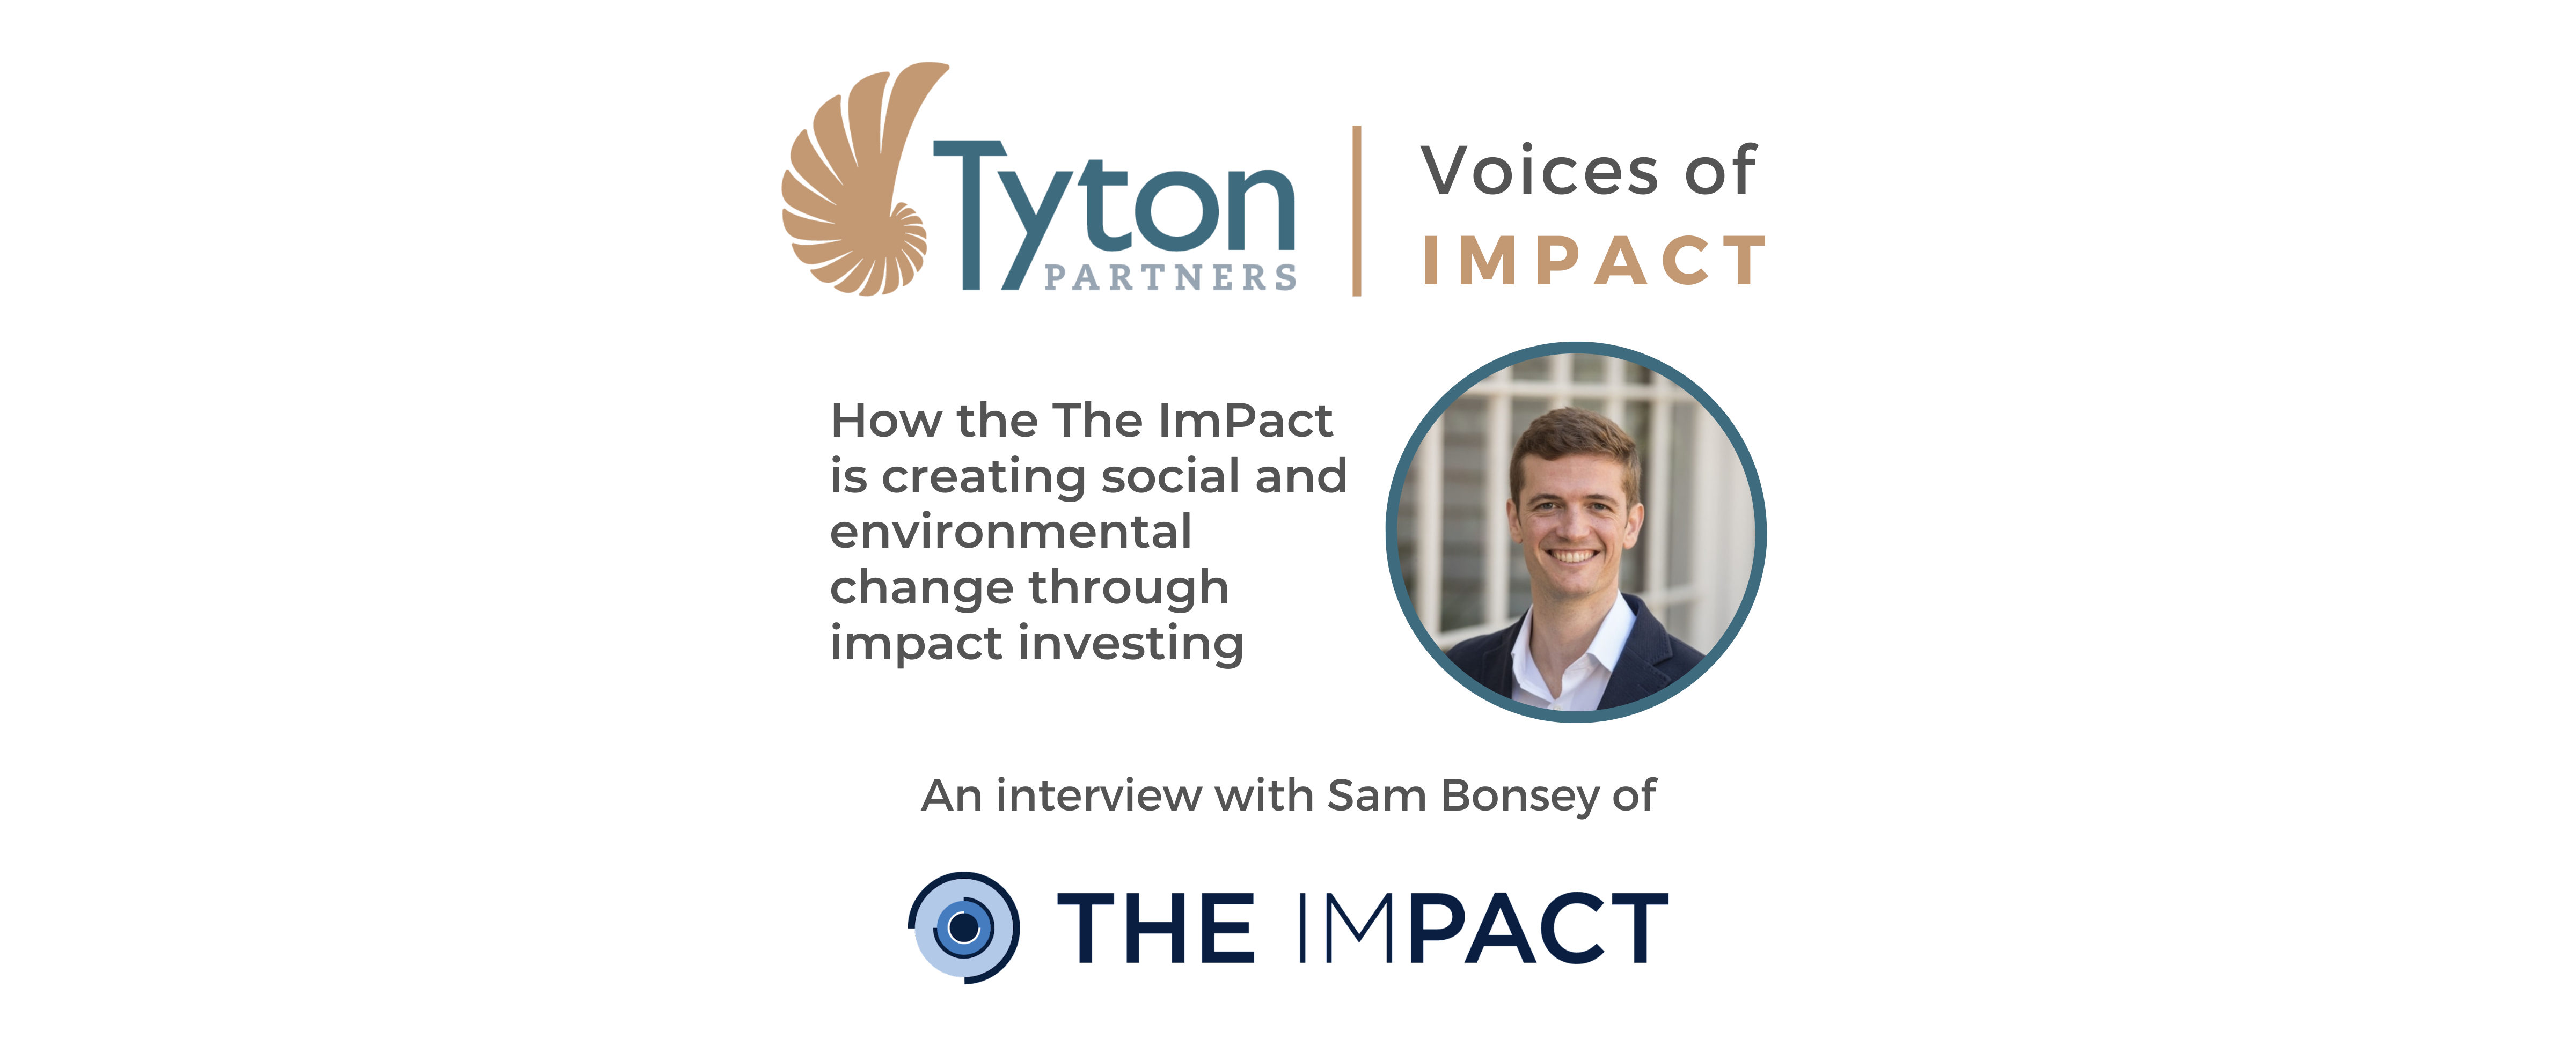 Tyton Partners Voices of Impact: Interview with Sam Bonsey on how The ImPact is creating social and environmental change through impact investing